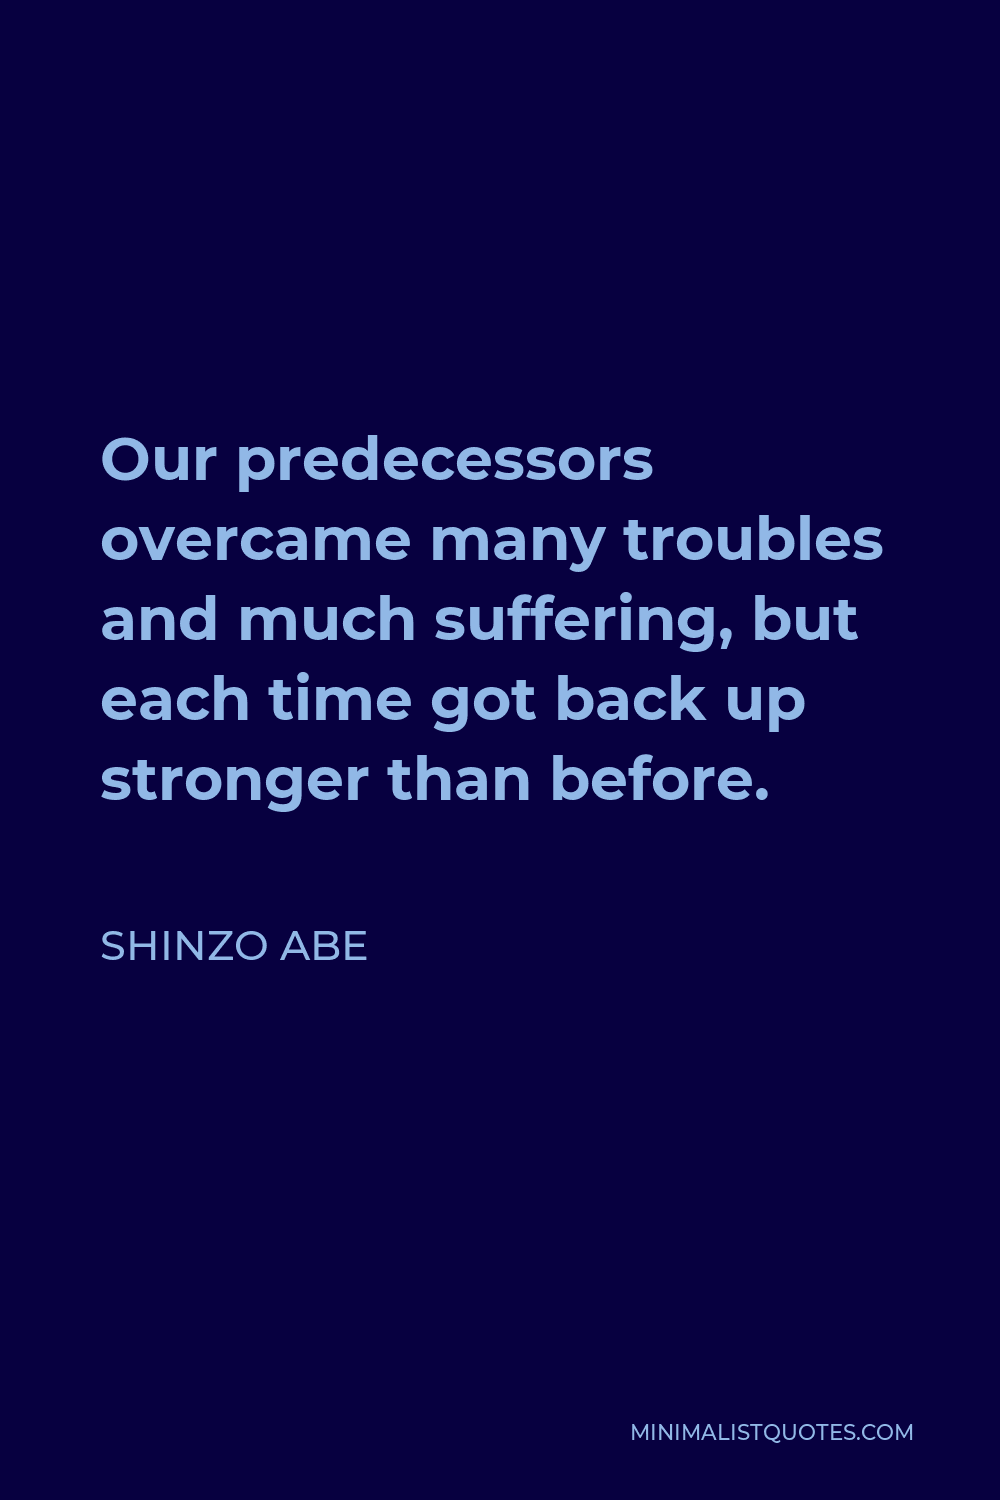 Shinzo Abe Quote - Our predecessors overcame many troubles and much suffering, but each time got back up stronger than before.